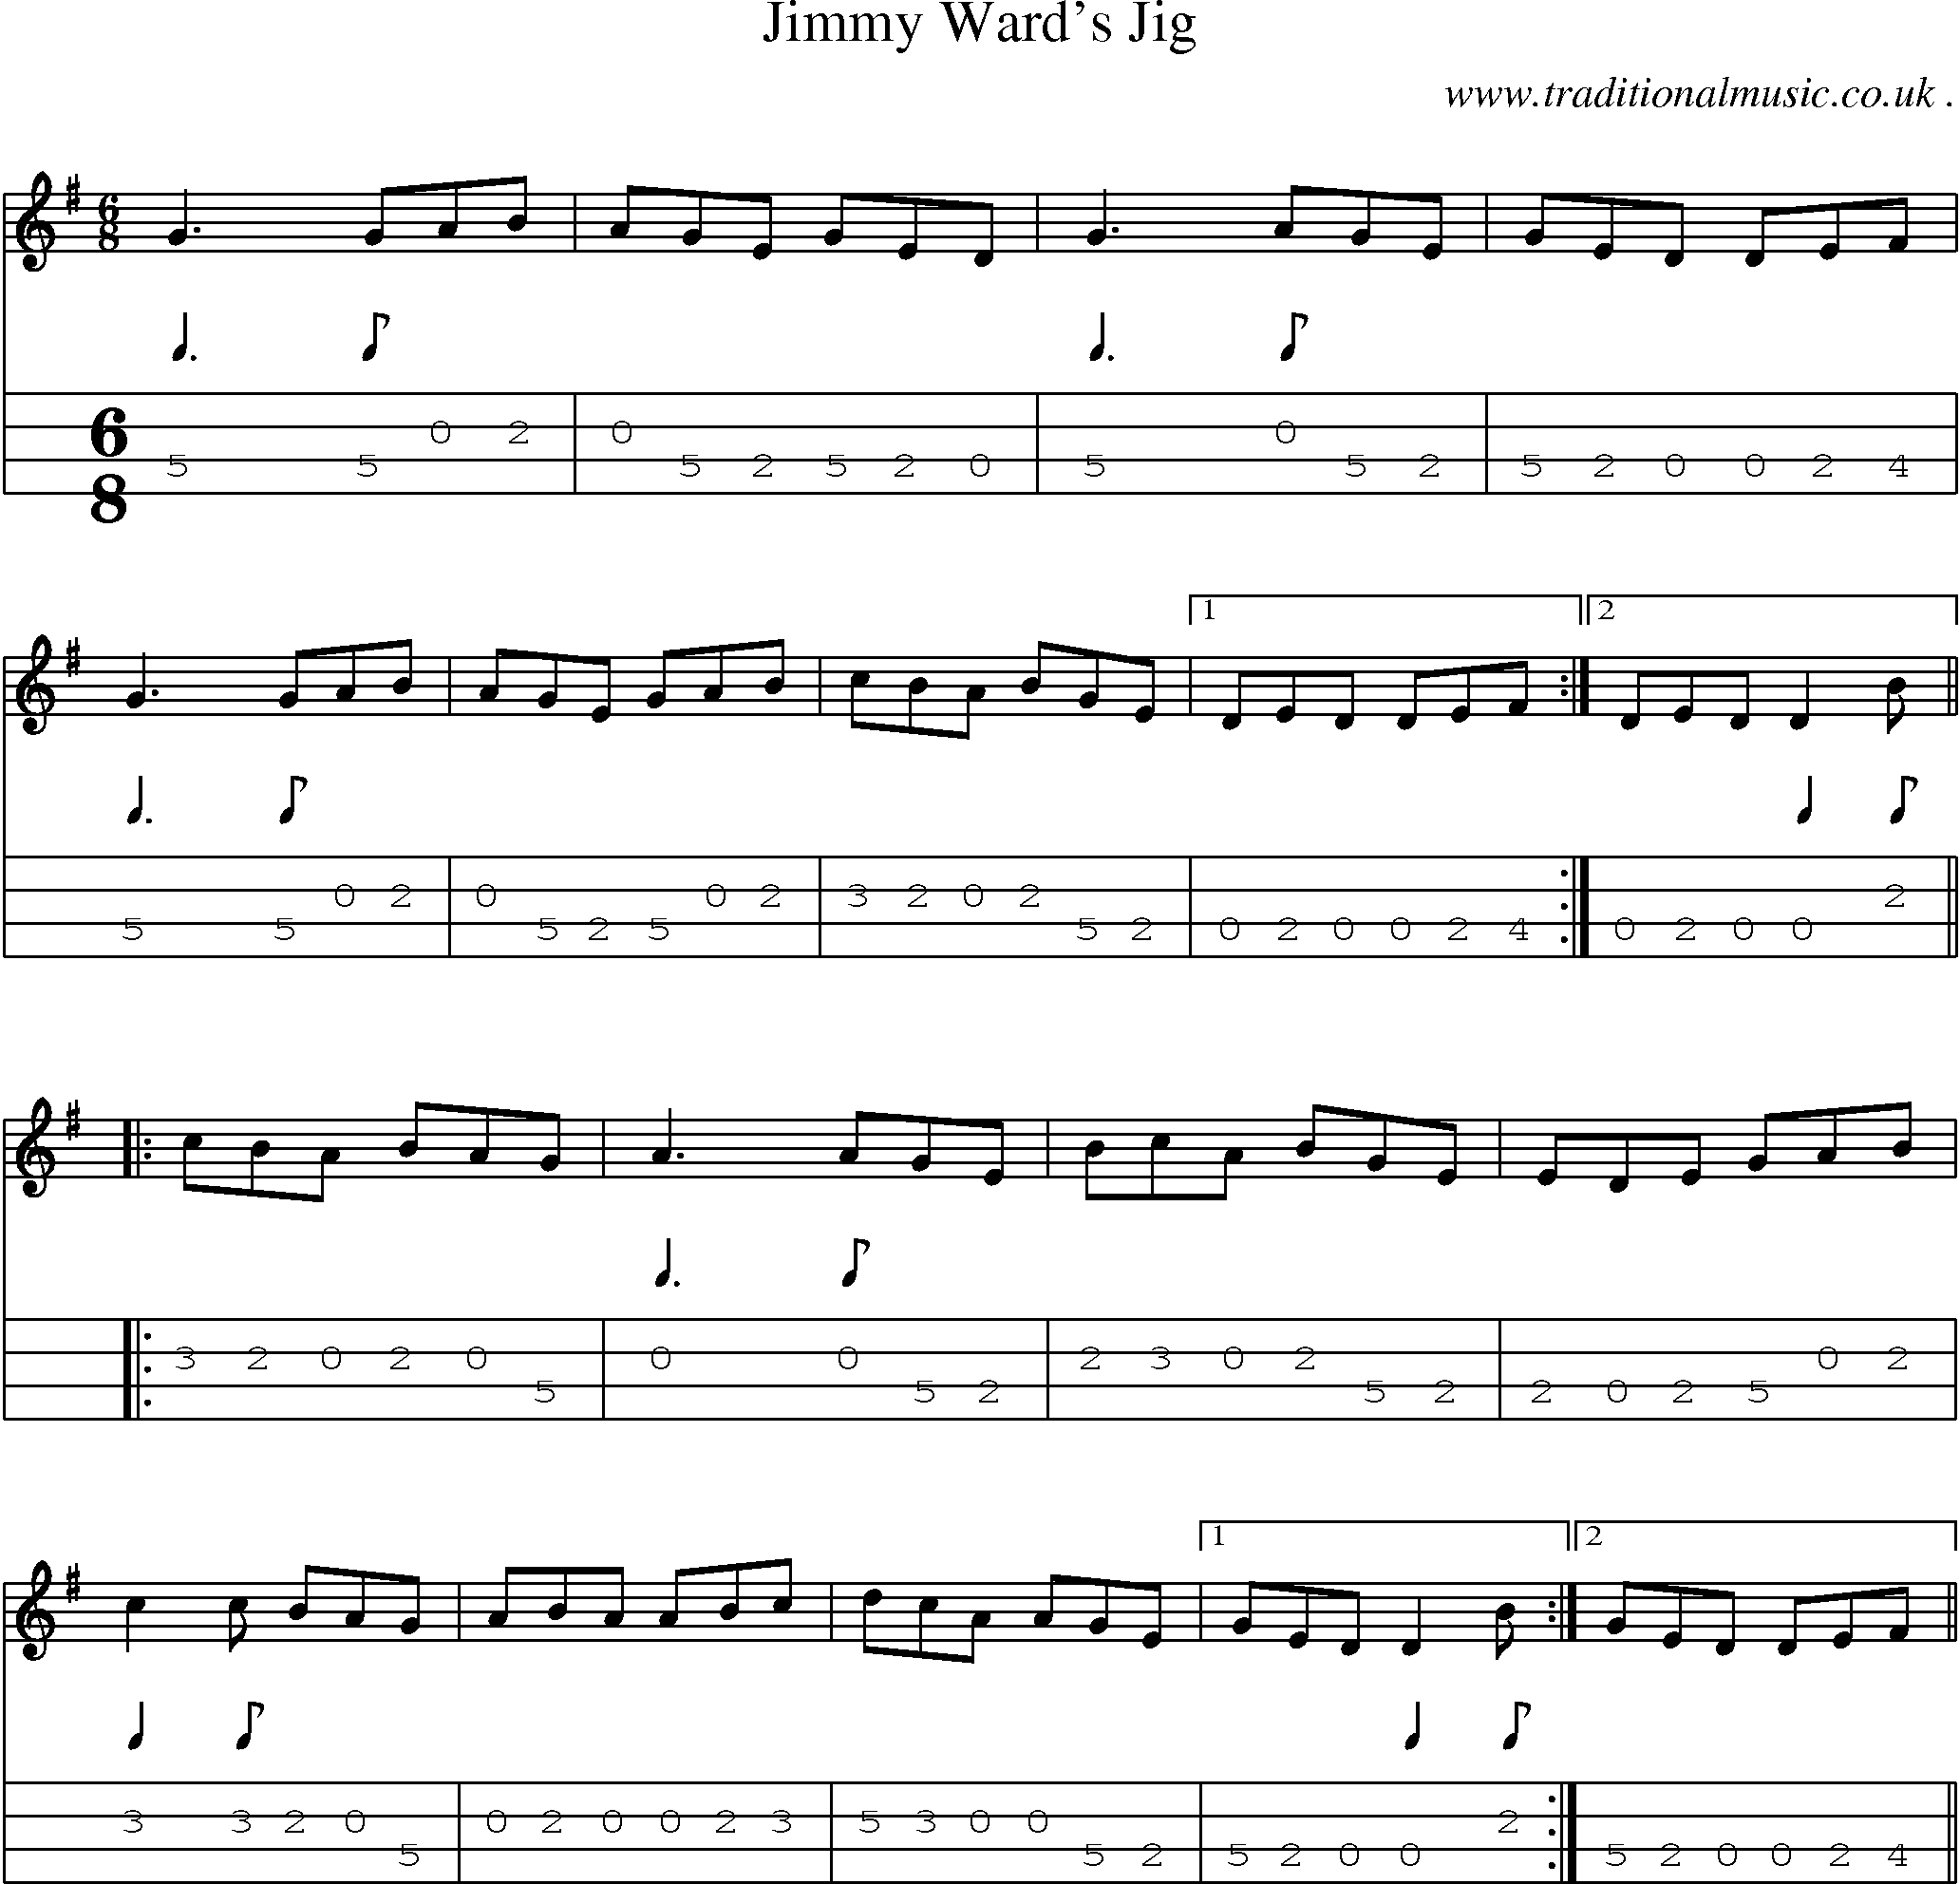 Sheet-Music and Mandolin Tabs for Jimmy Wards Jig